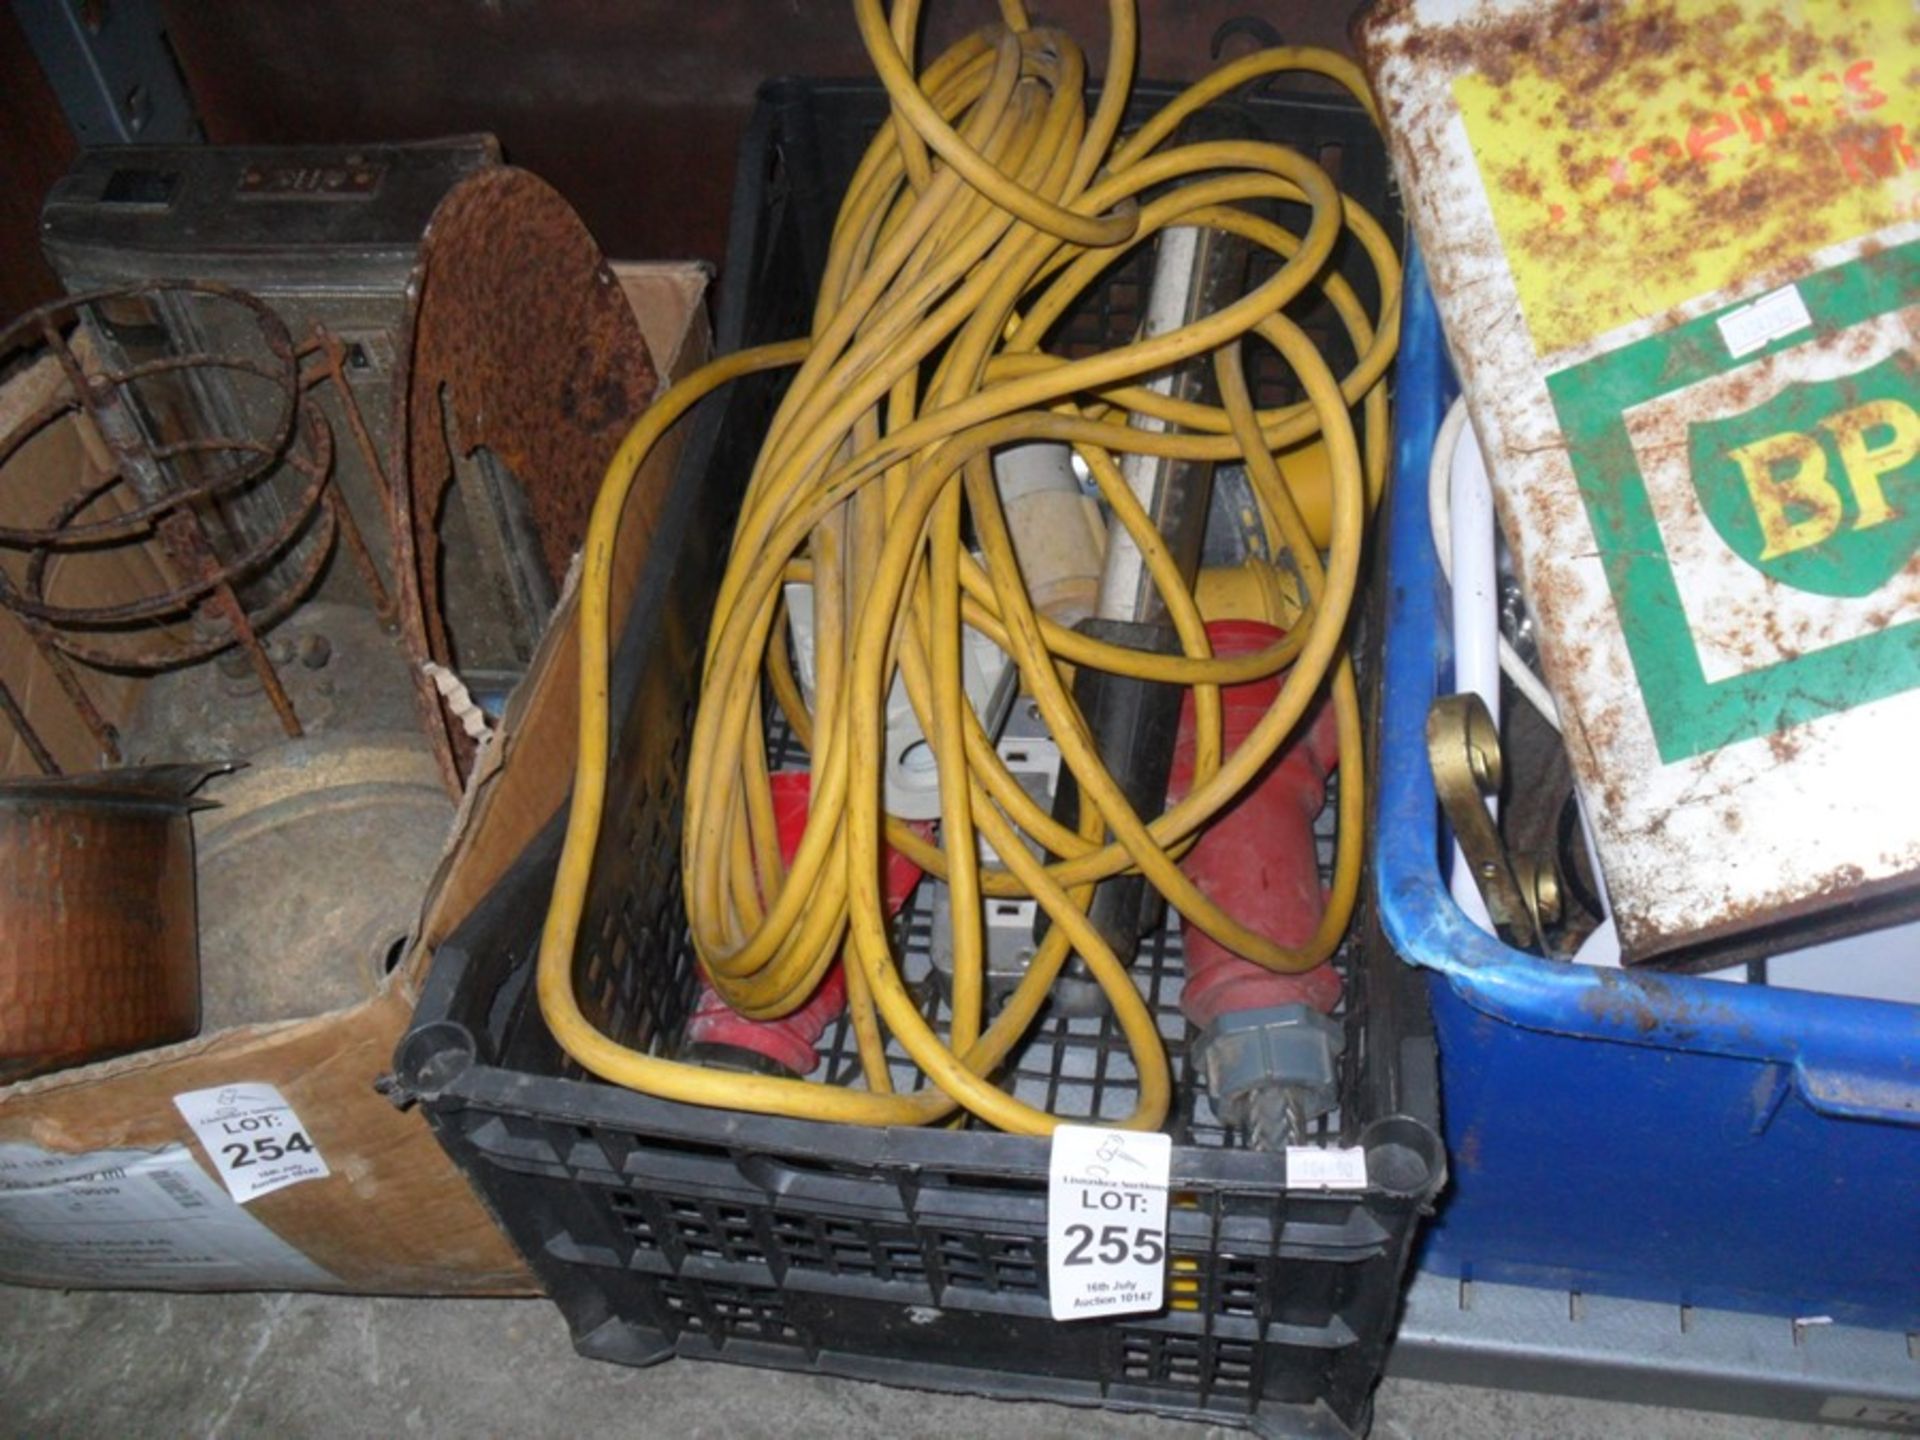 CRATE OF 110V EXTENSION EQUIPMENT